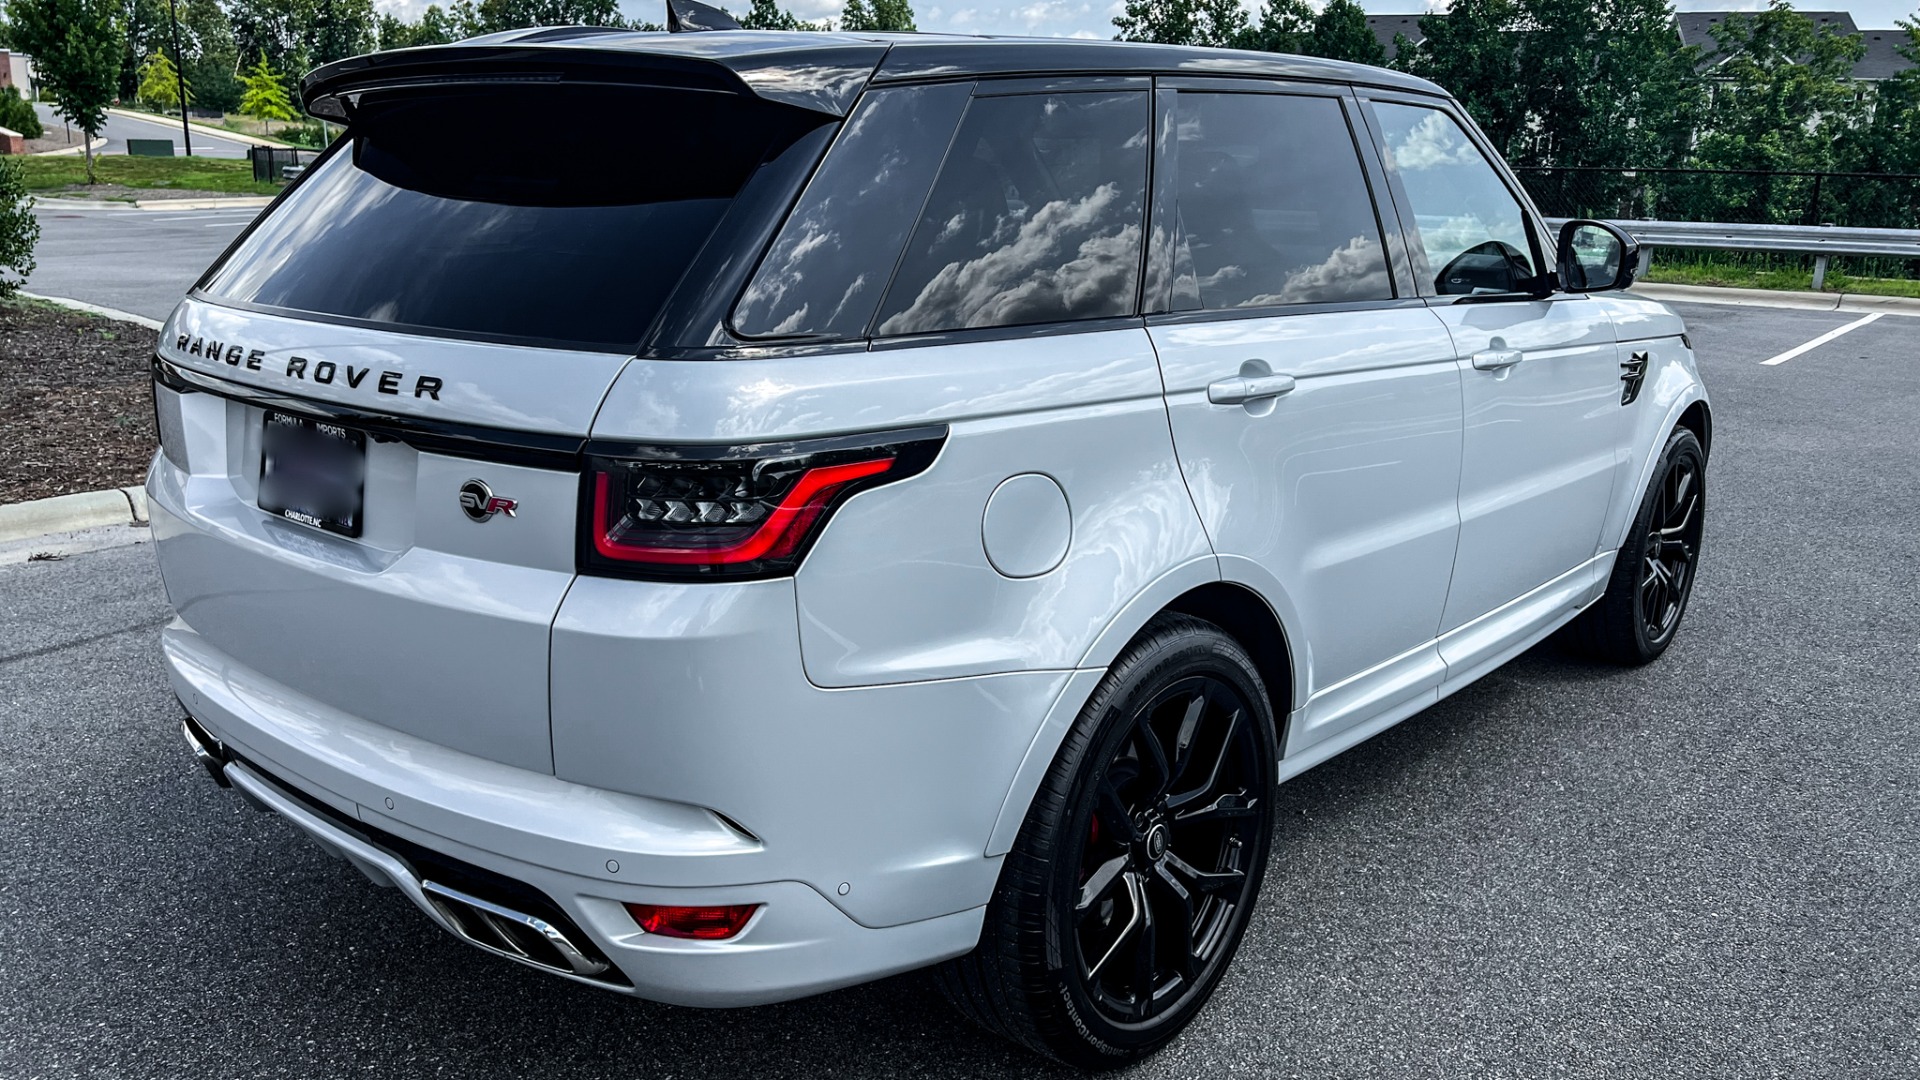 Used 2018 Land Rover Range Rover Sport SVR / SVO ULTRA METALLIC PAINT / MERIDIAN SIGNATURE / 22IN WHEELS for sale Sold at Formula Imports in Charlotte NC 28227 9